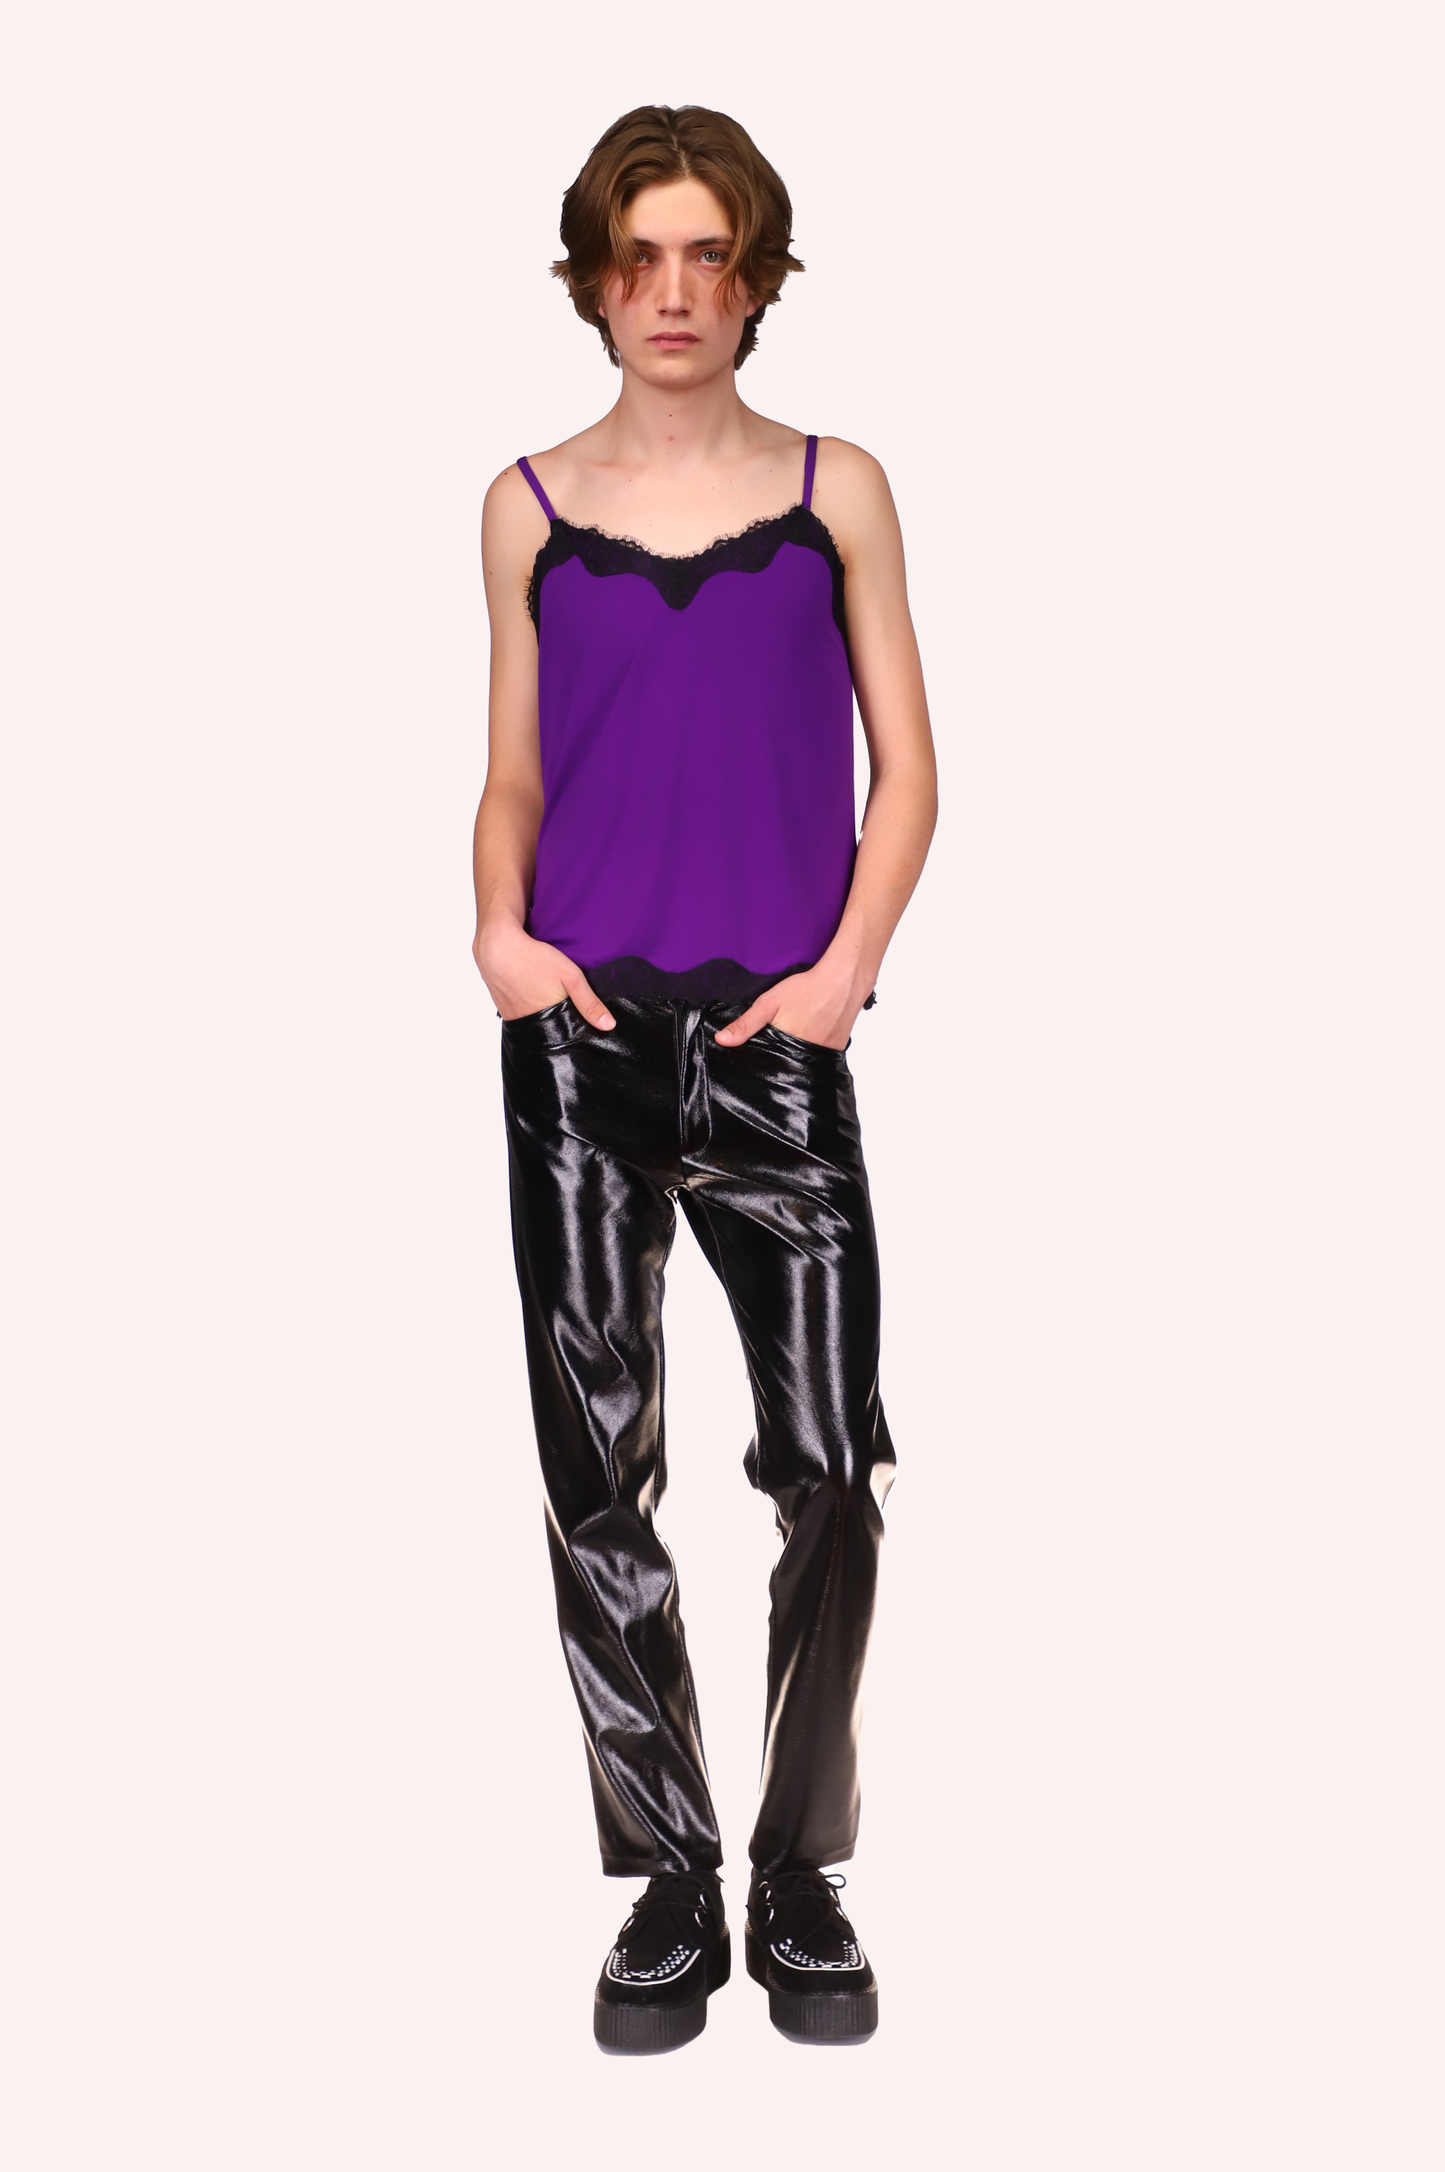 Black Patent Pants, just above ankles, 2 front pocket, front zipper, in a shiny black texture